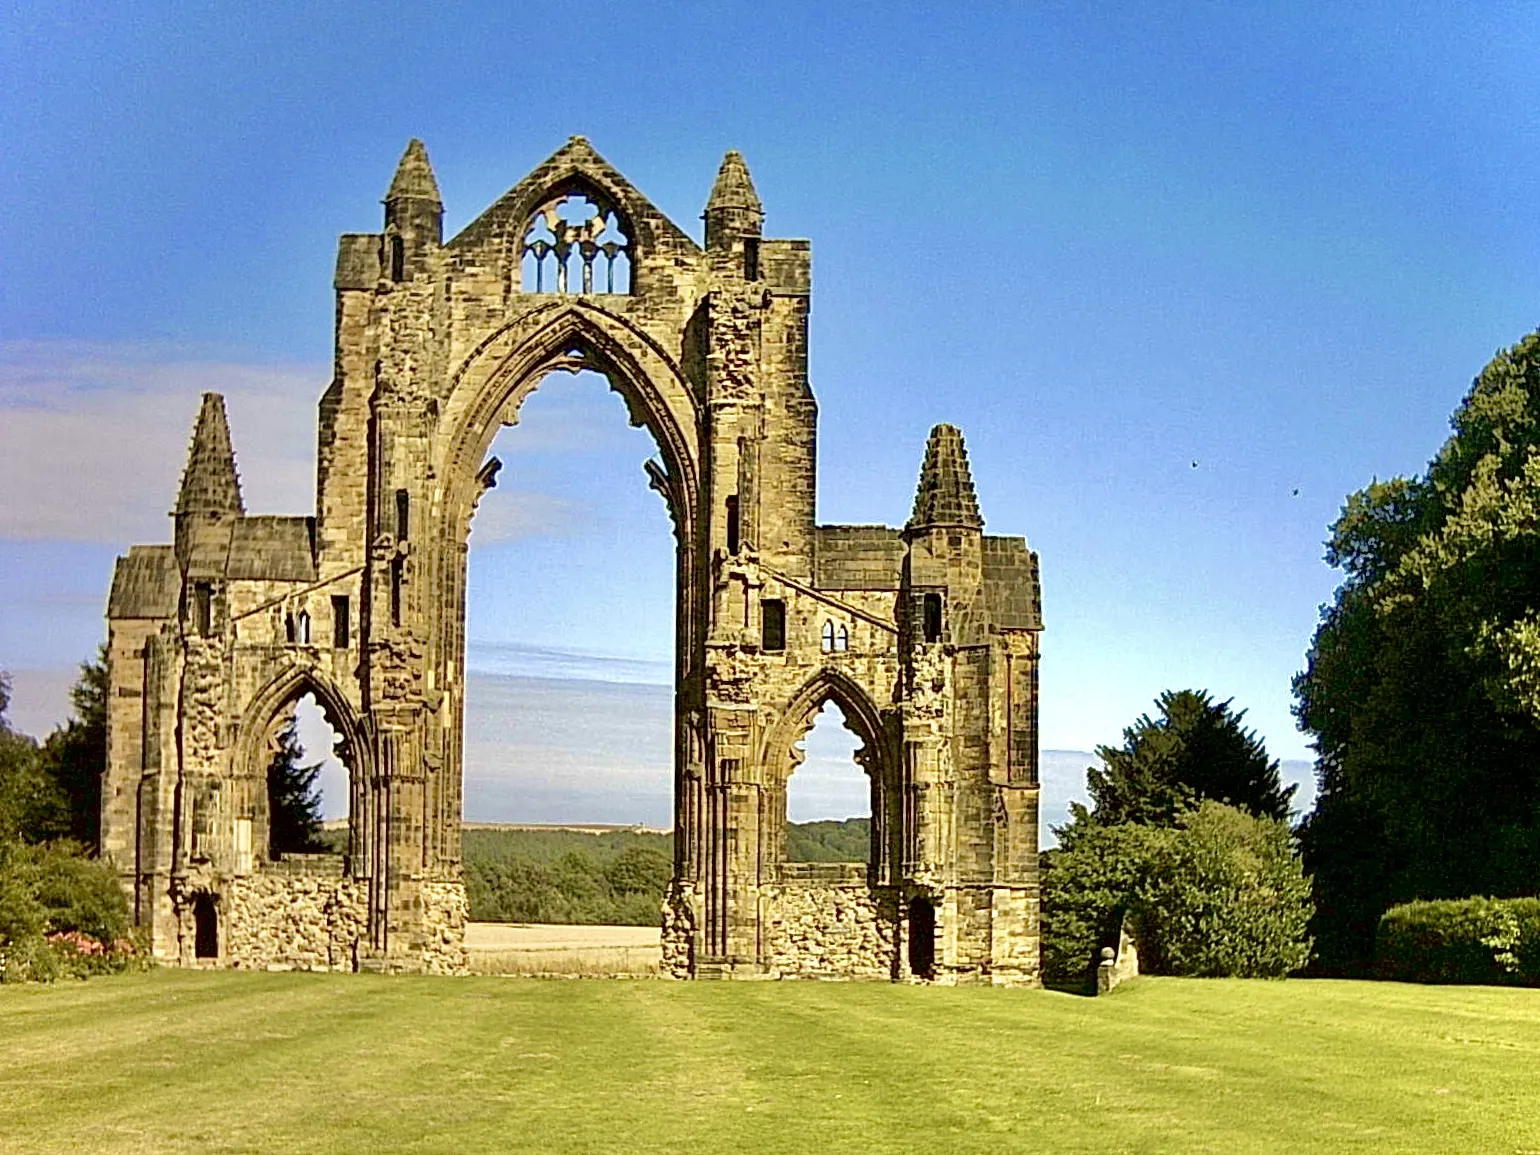 Photo showing: Gisborough Priory in Guisborough north Yorkshire (redcar and cleveland)
taken by myself (neil gray)